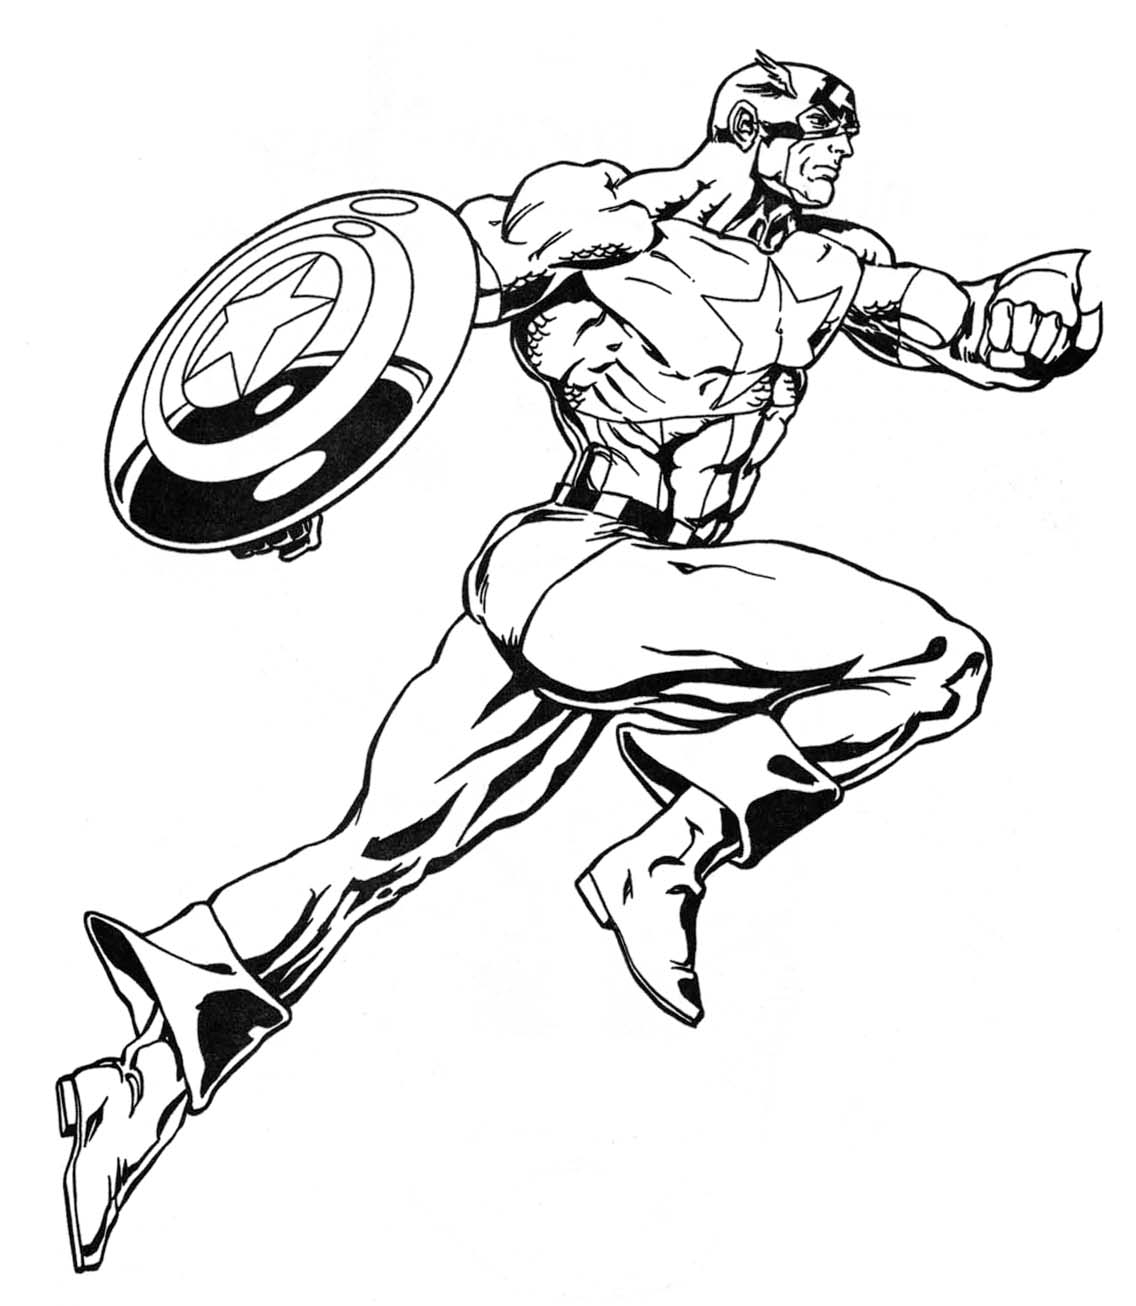 Marvel Super Heroes - Free Colouring Pages